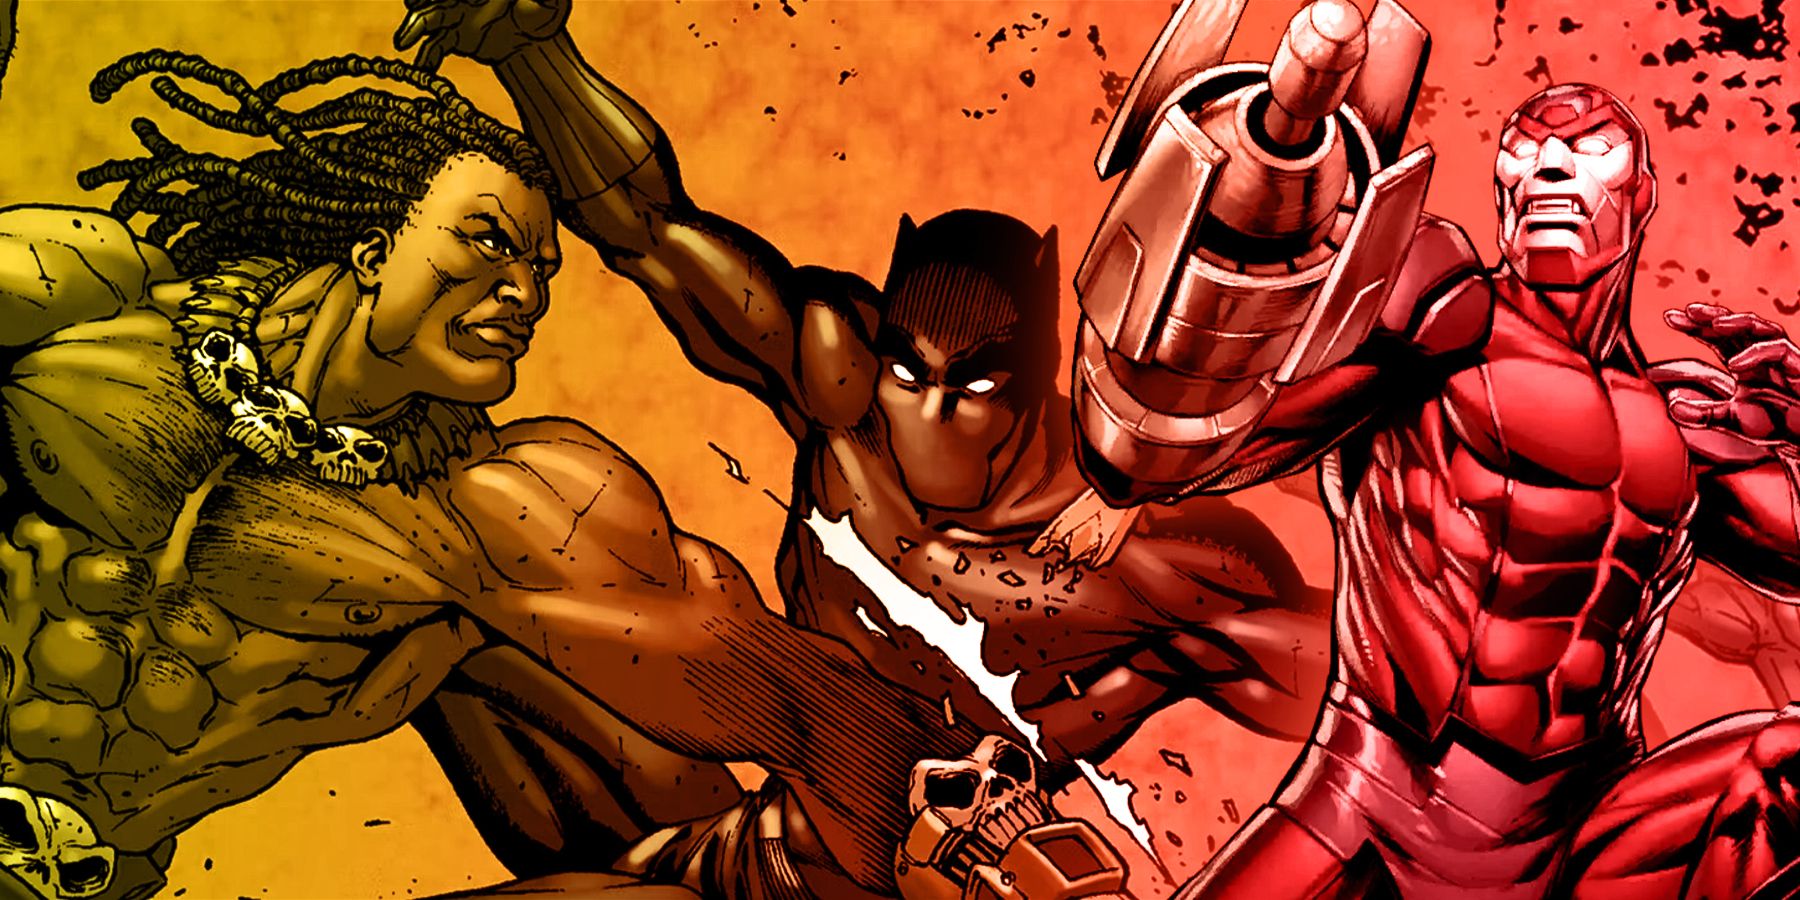 Black Panther and Marvel's increasingly troubled relationship with